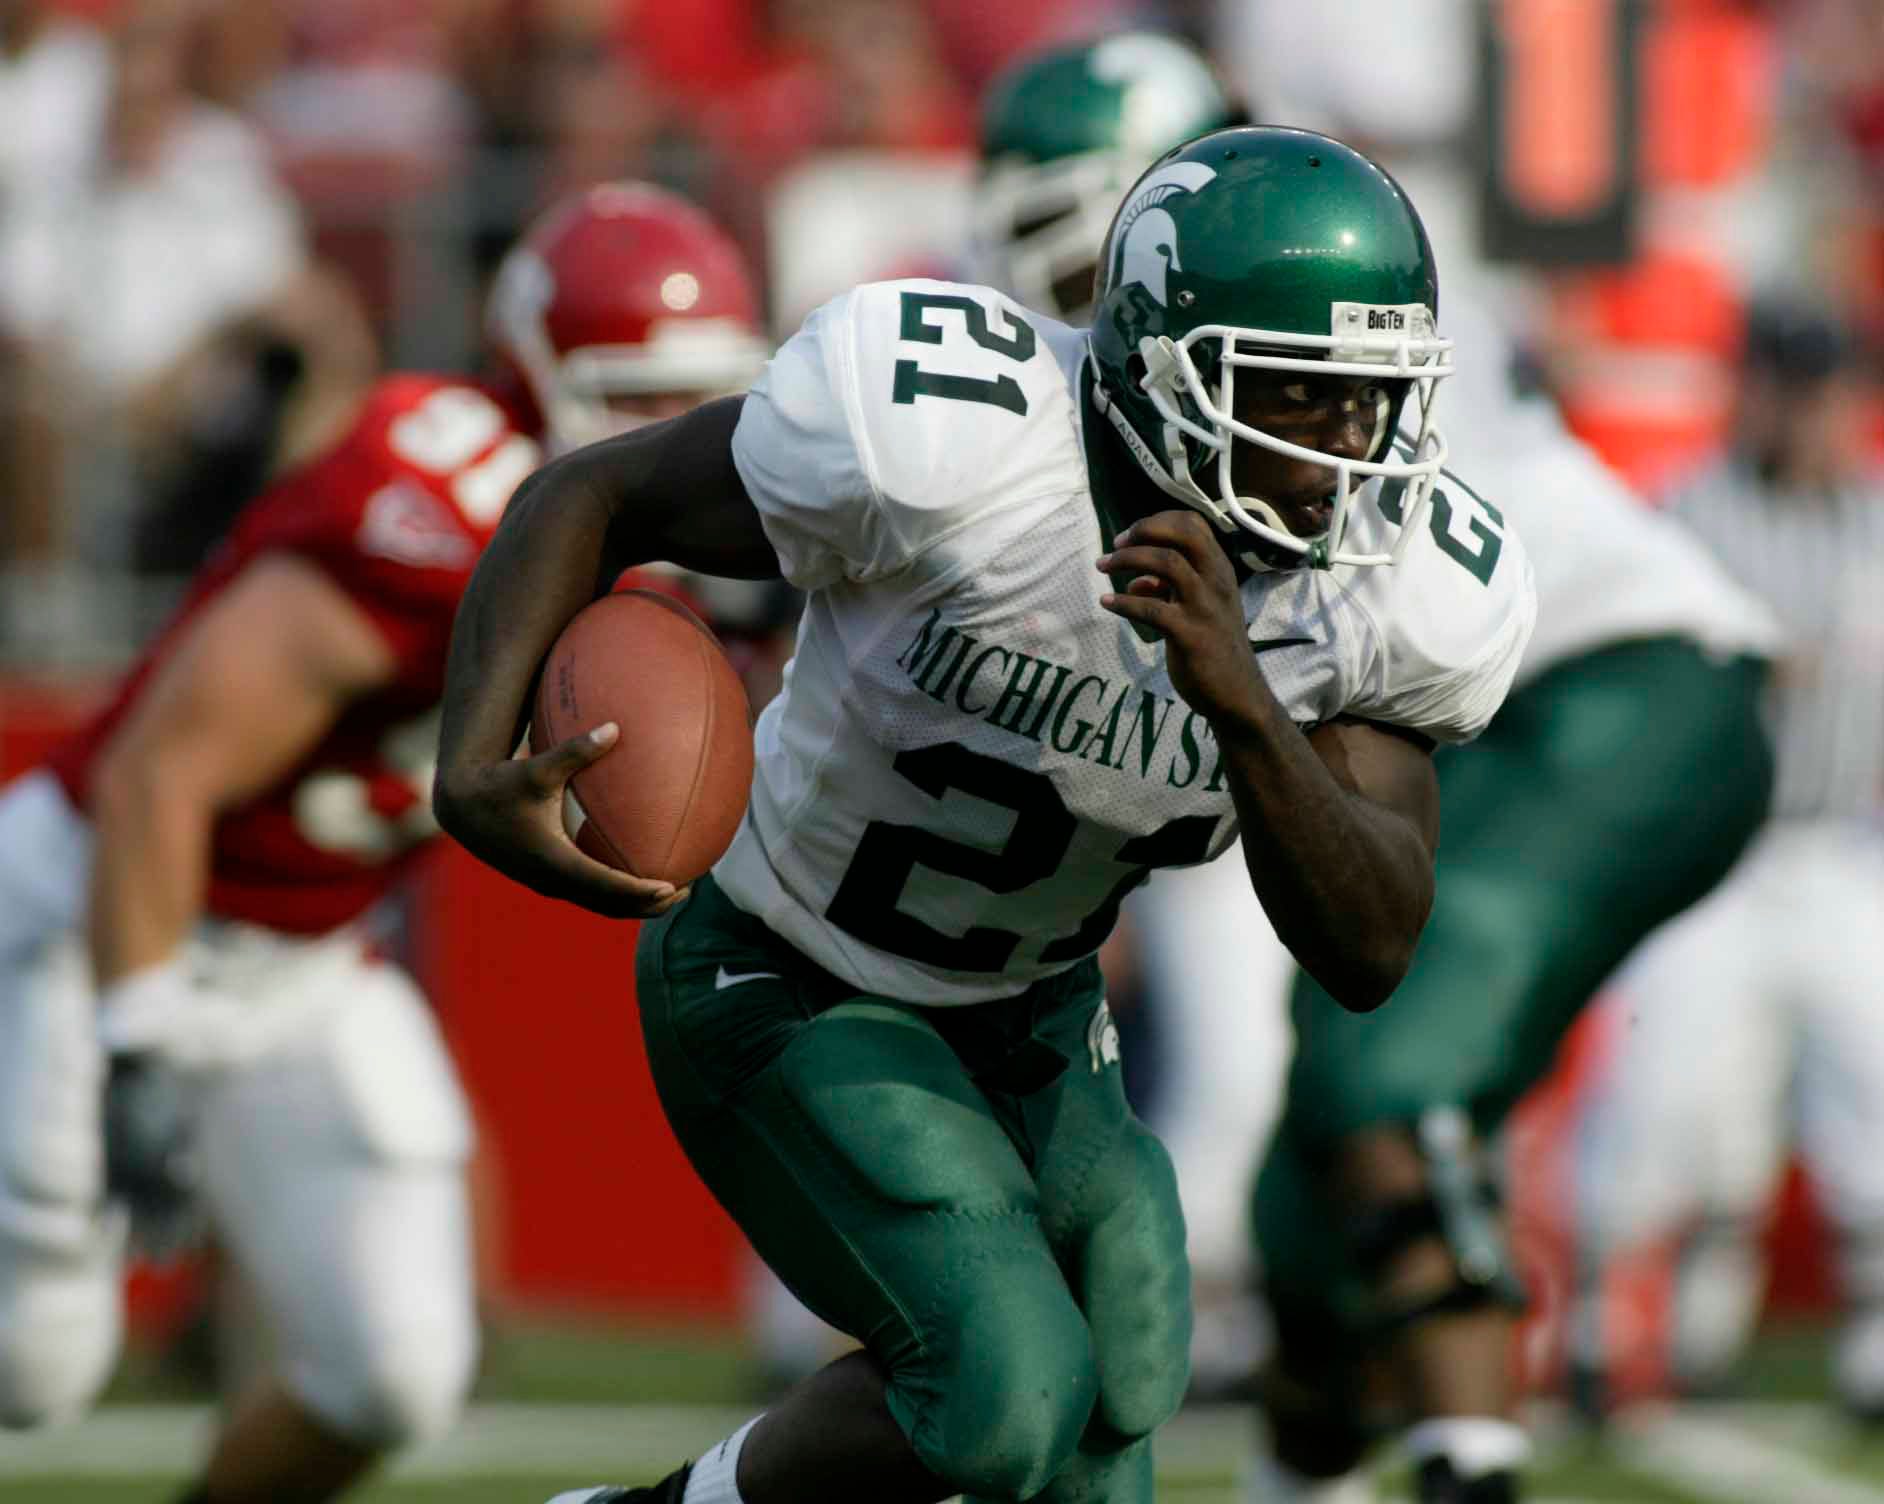 RETURN SPECIALIST – DeAndra Cobb, 2003-04: A first-team All-American as a junior in 2003, Cobb led the Big Ten and ranked No. 11 in the NCAA in kickoff returns with an average of 27.2 yards, while his 763 kickoff return yards are the fourth-most in MSU history. He returned three kicks for touchdowns that season and capped his two seasons with 1,632 return yards and four touchdowns.